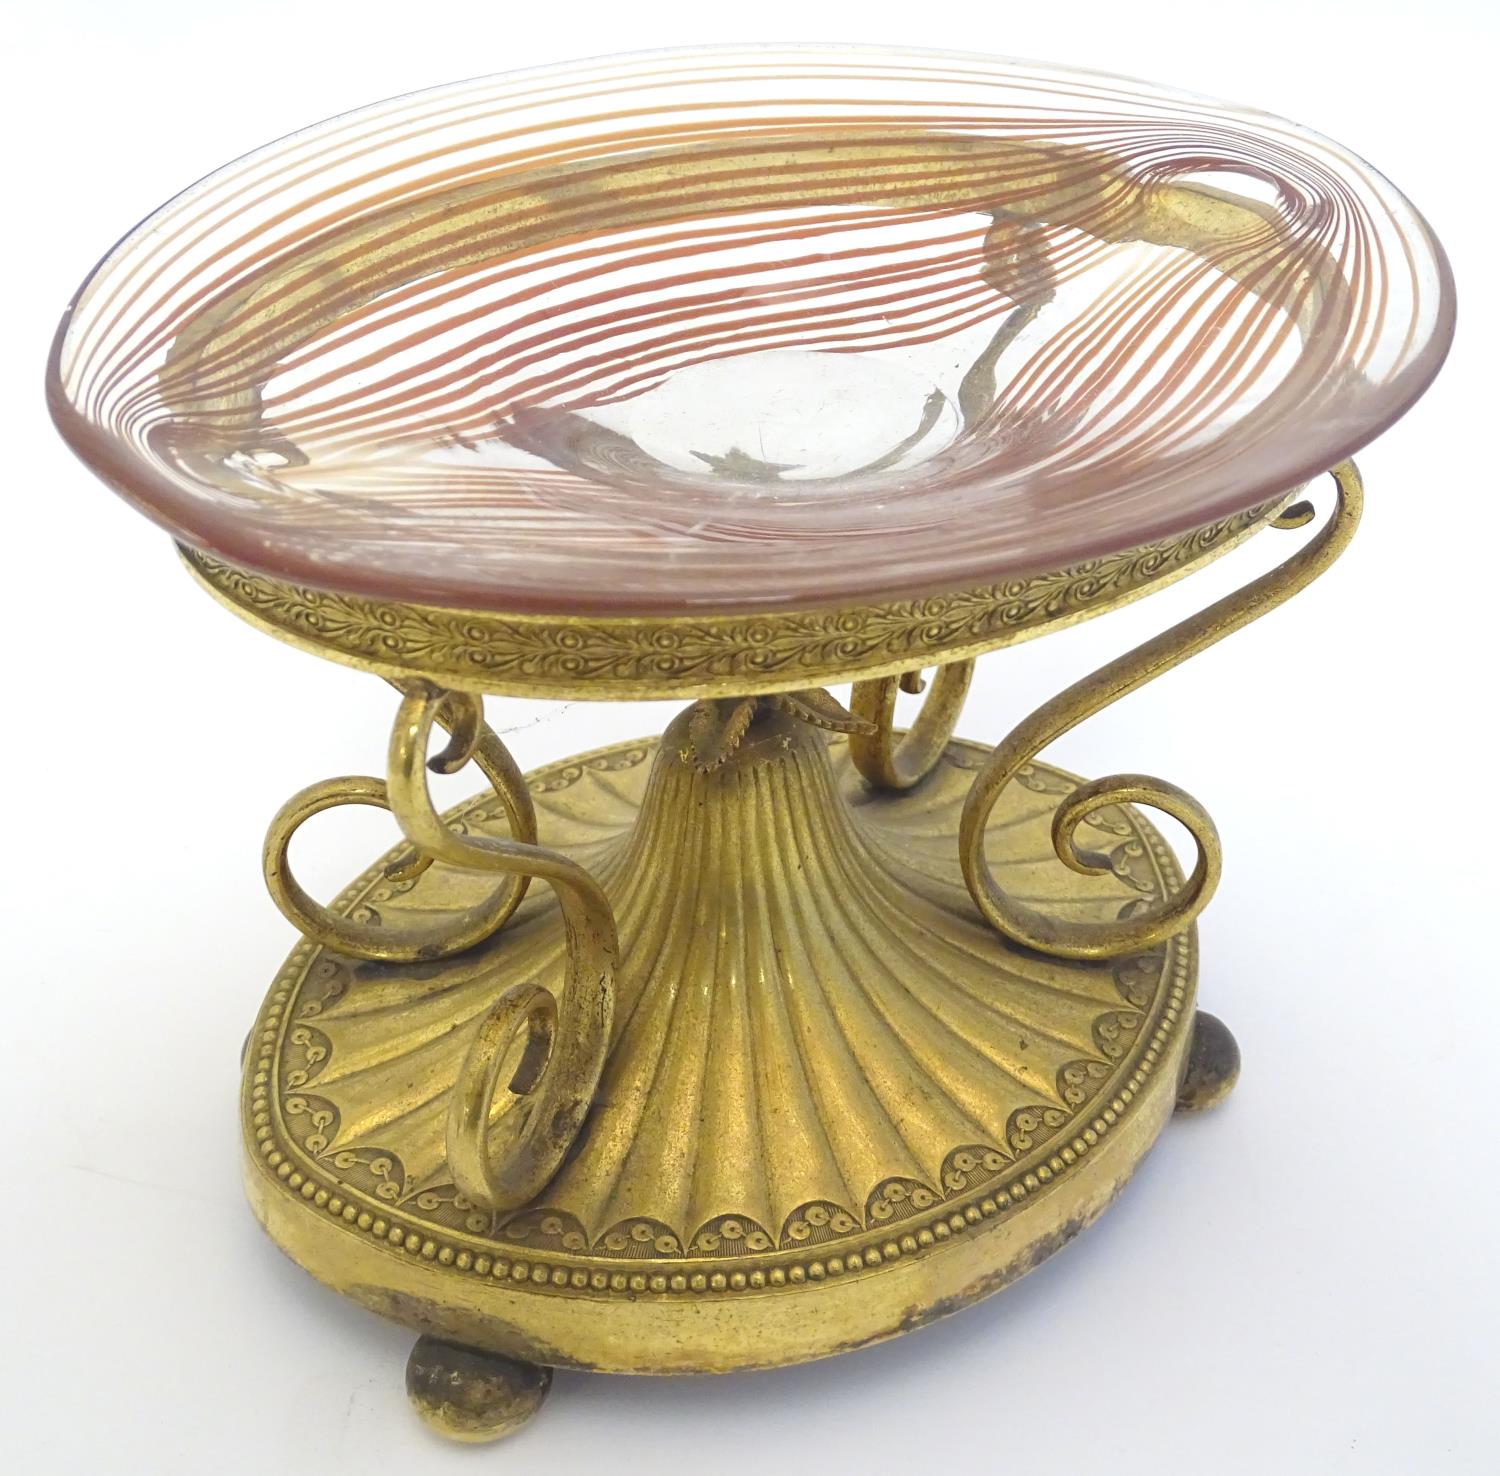 A c.1903 Elkington & Co. gilt metal oval centrepiece stand with scrolling decoration and central - Image 7 of 22